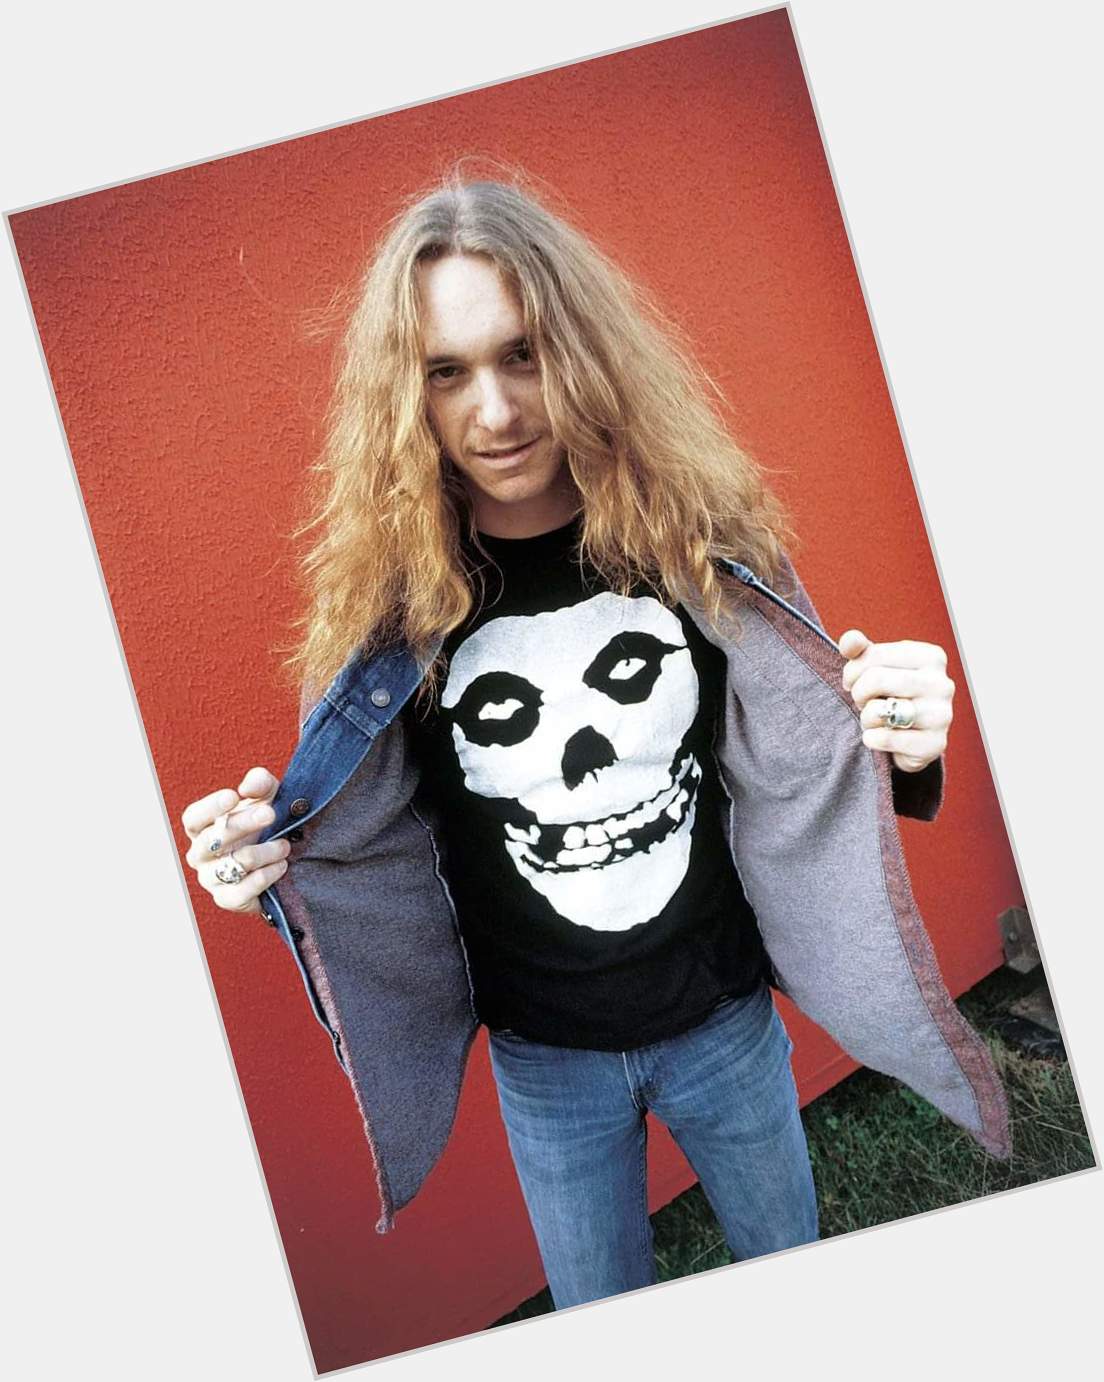 Happy Birthday Cliff Burton

Without you, I have no inspiration playing bass 

Rock on, Brother \\m/ 